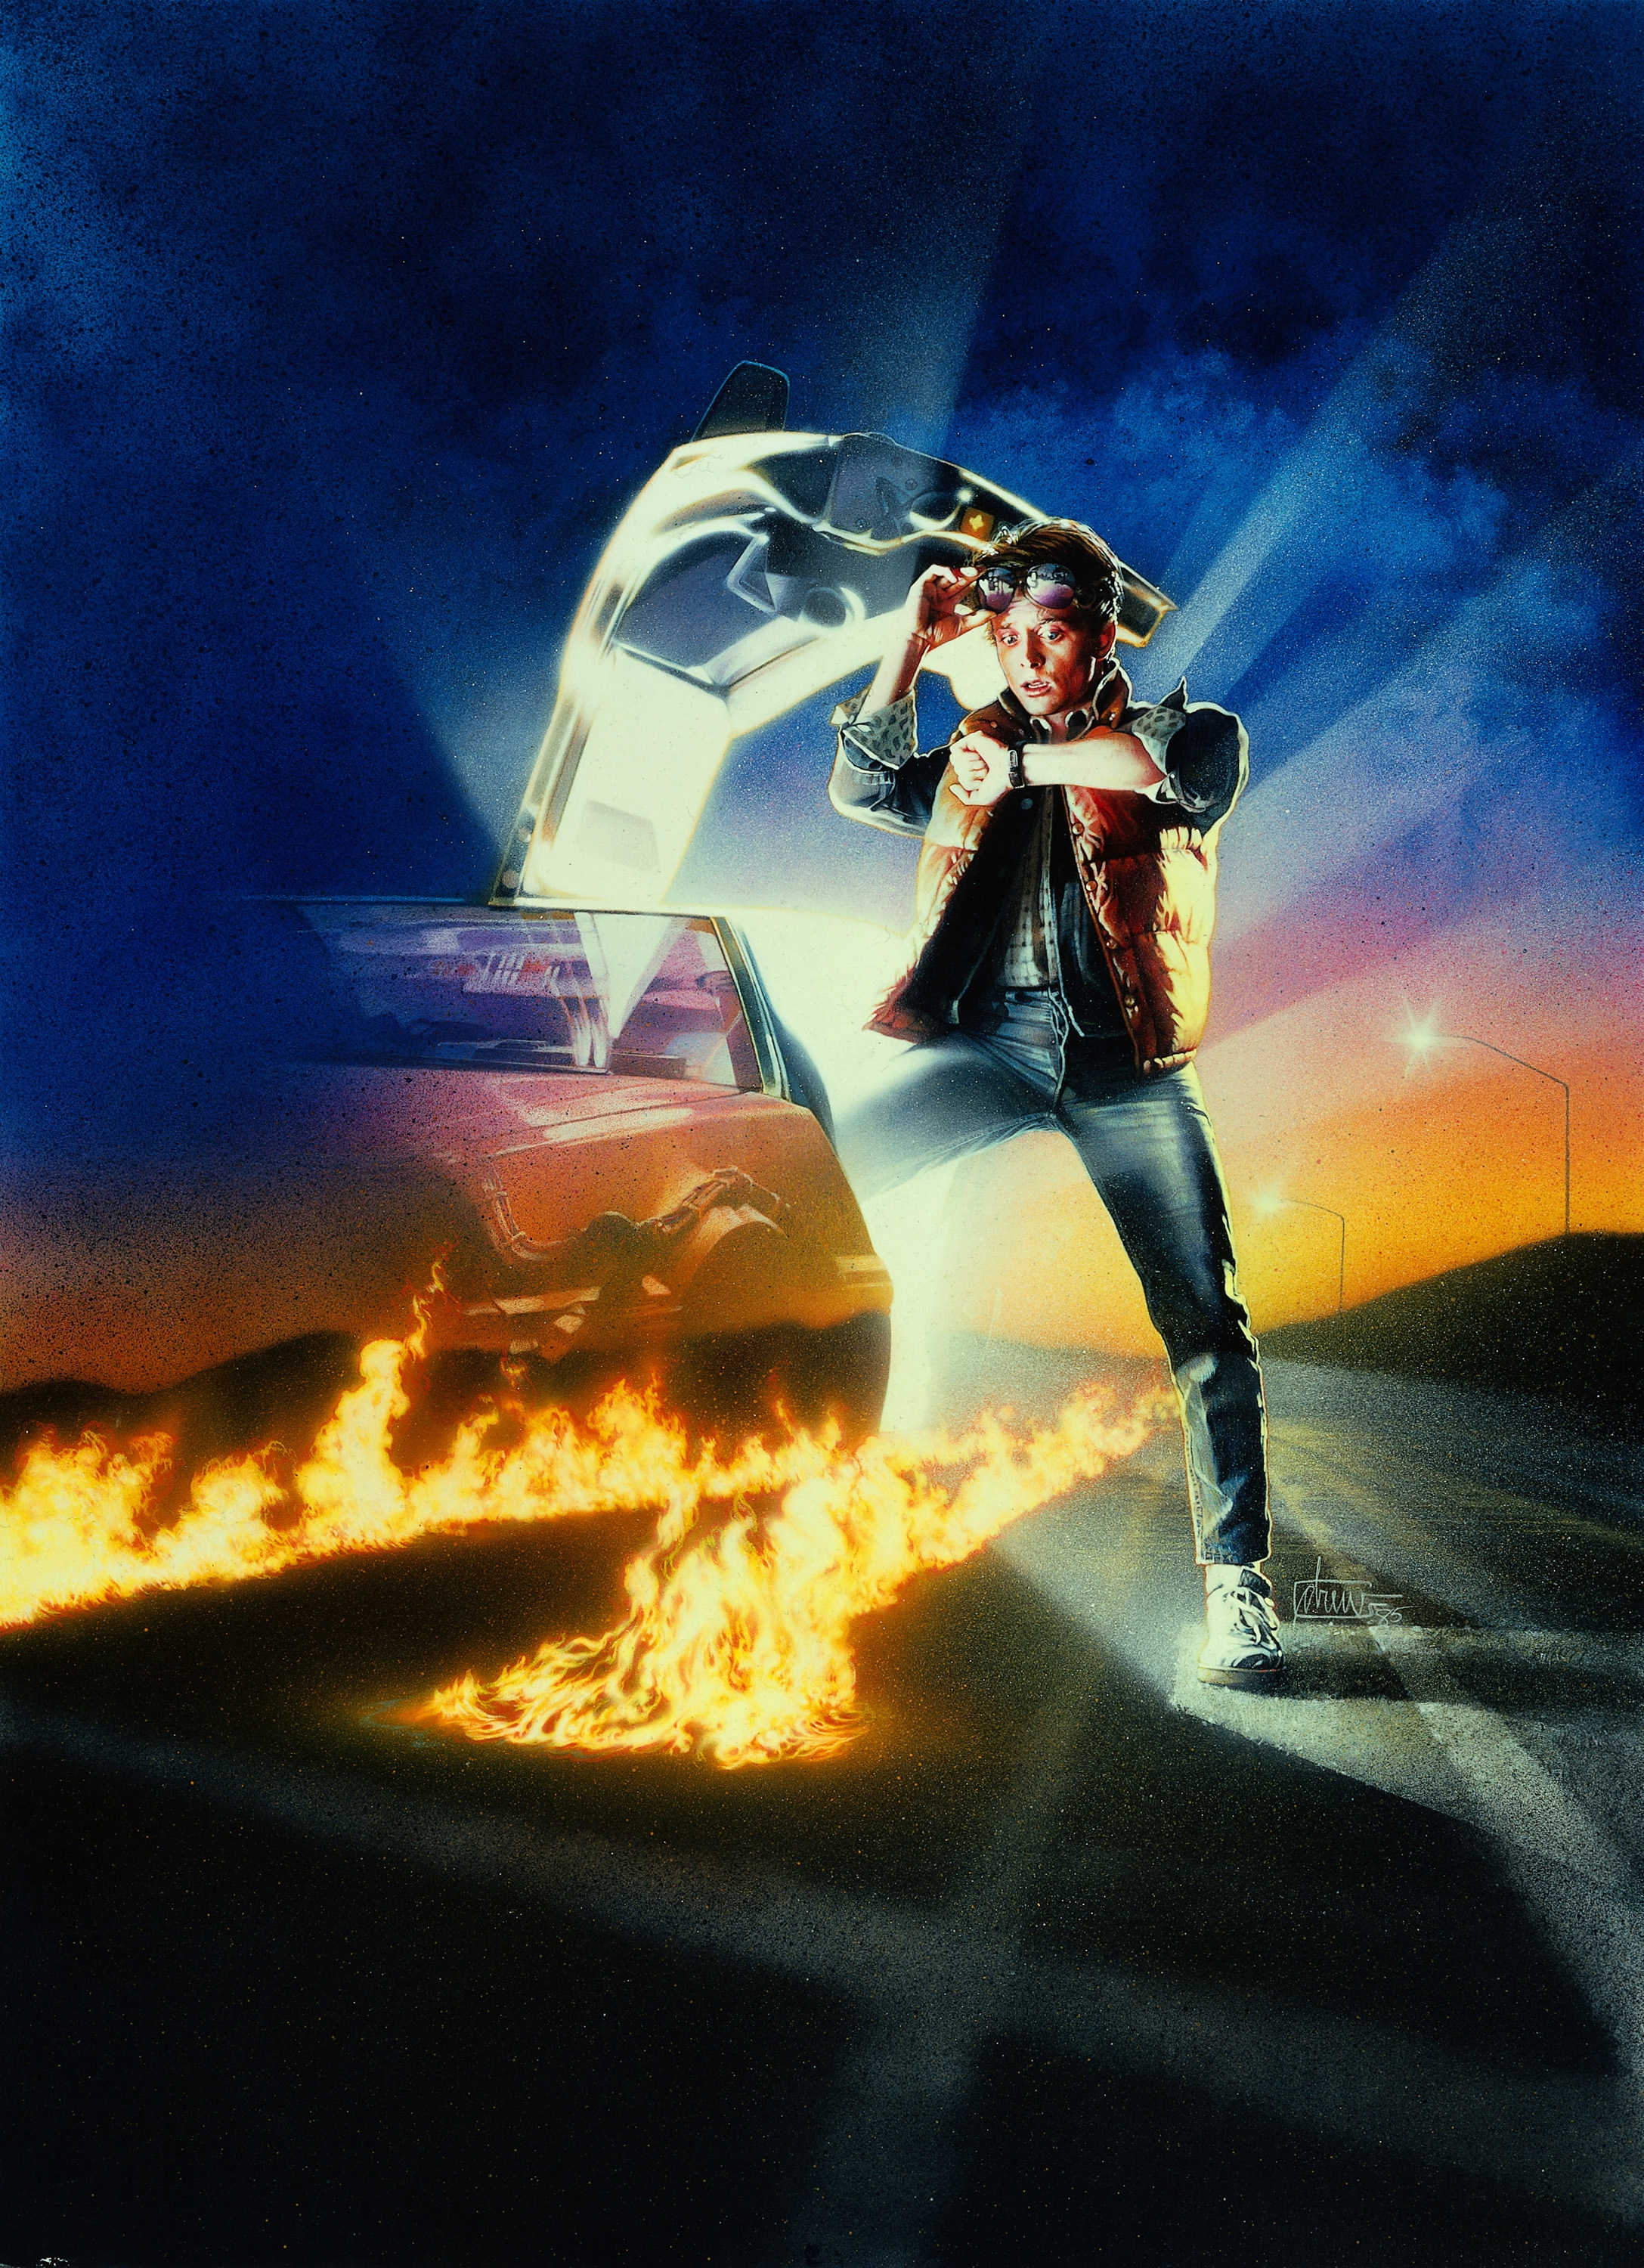 back to the future marty mcfly 2175x3000 wallpaper High Quality Wallpaper, High Definition Wallpaper